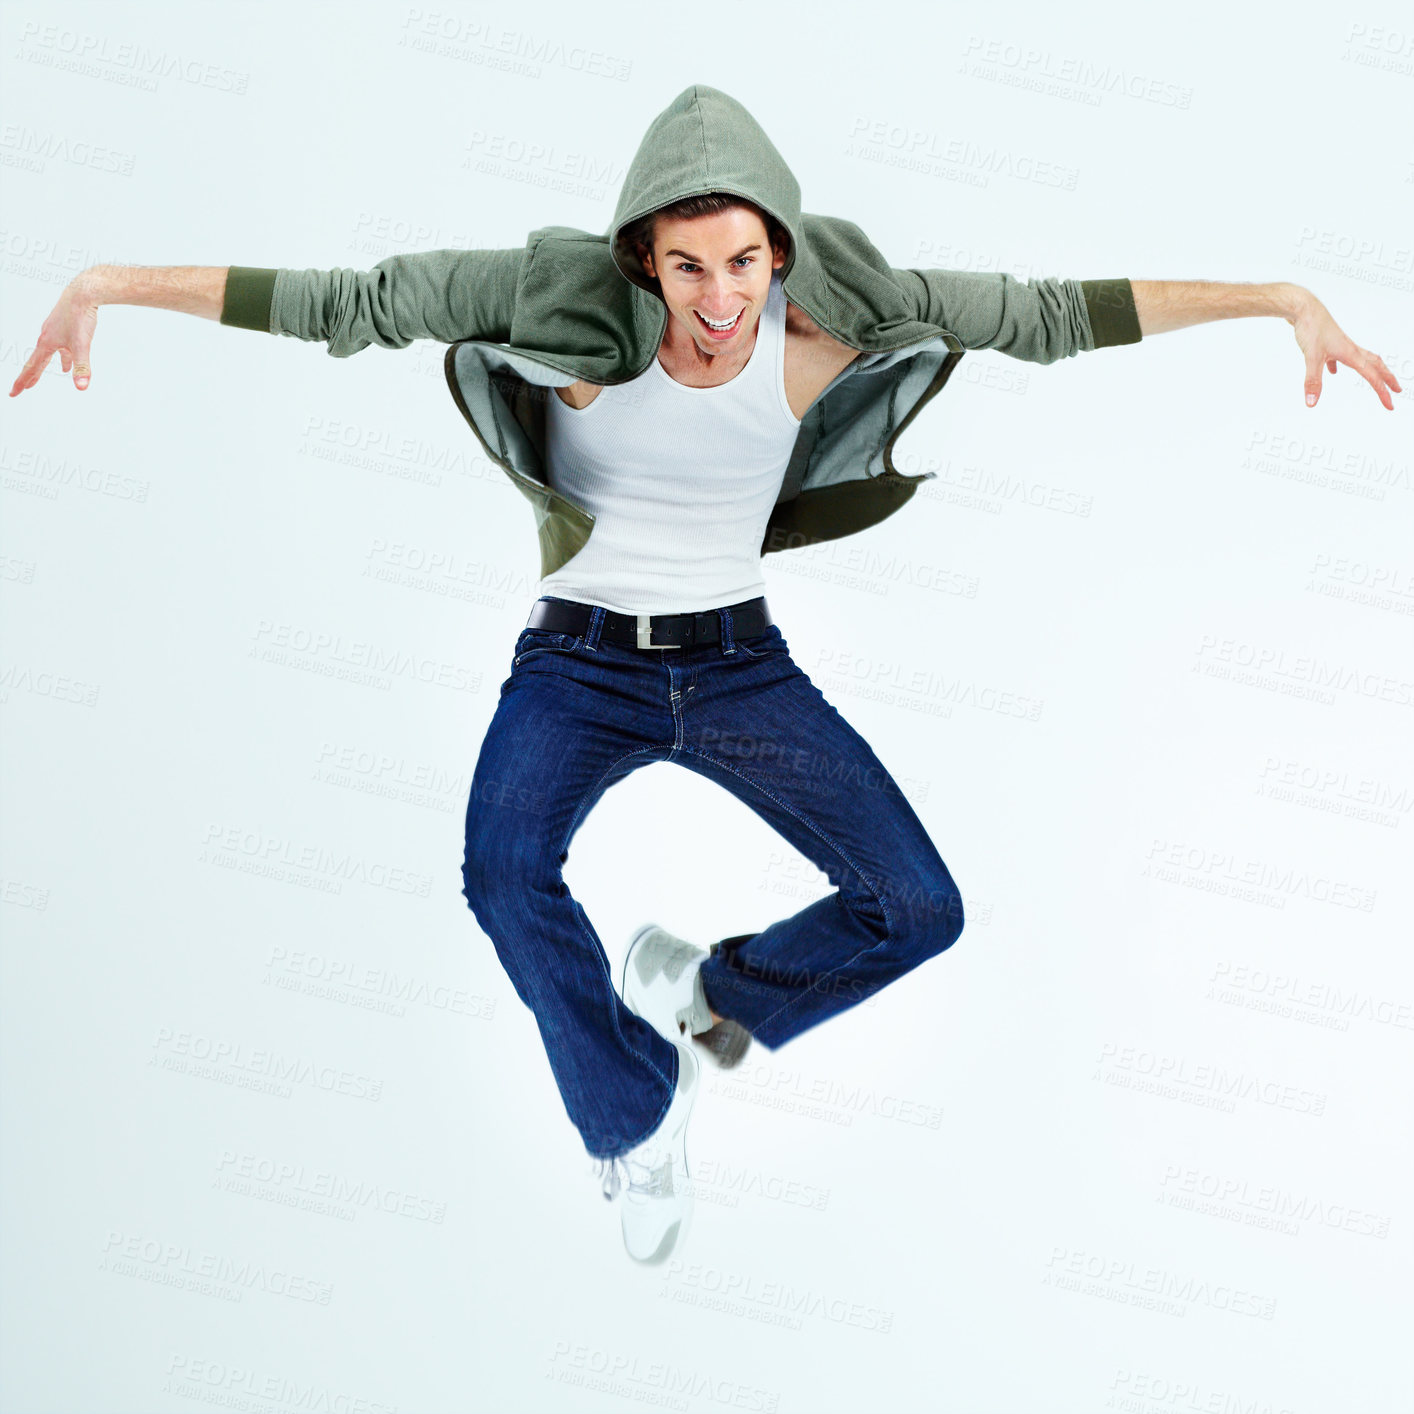 Buy stock photo Portrait of a young man jumping up and posing while in the air